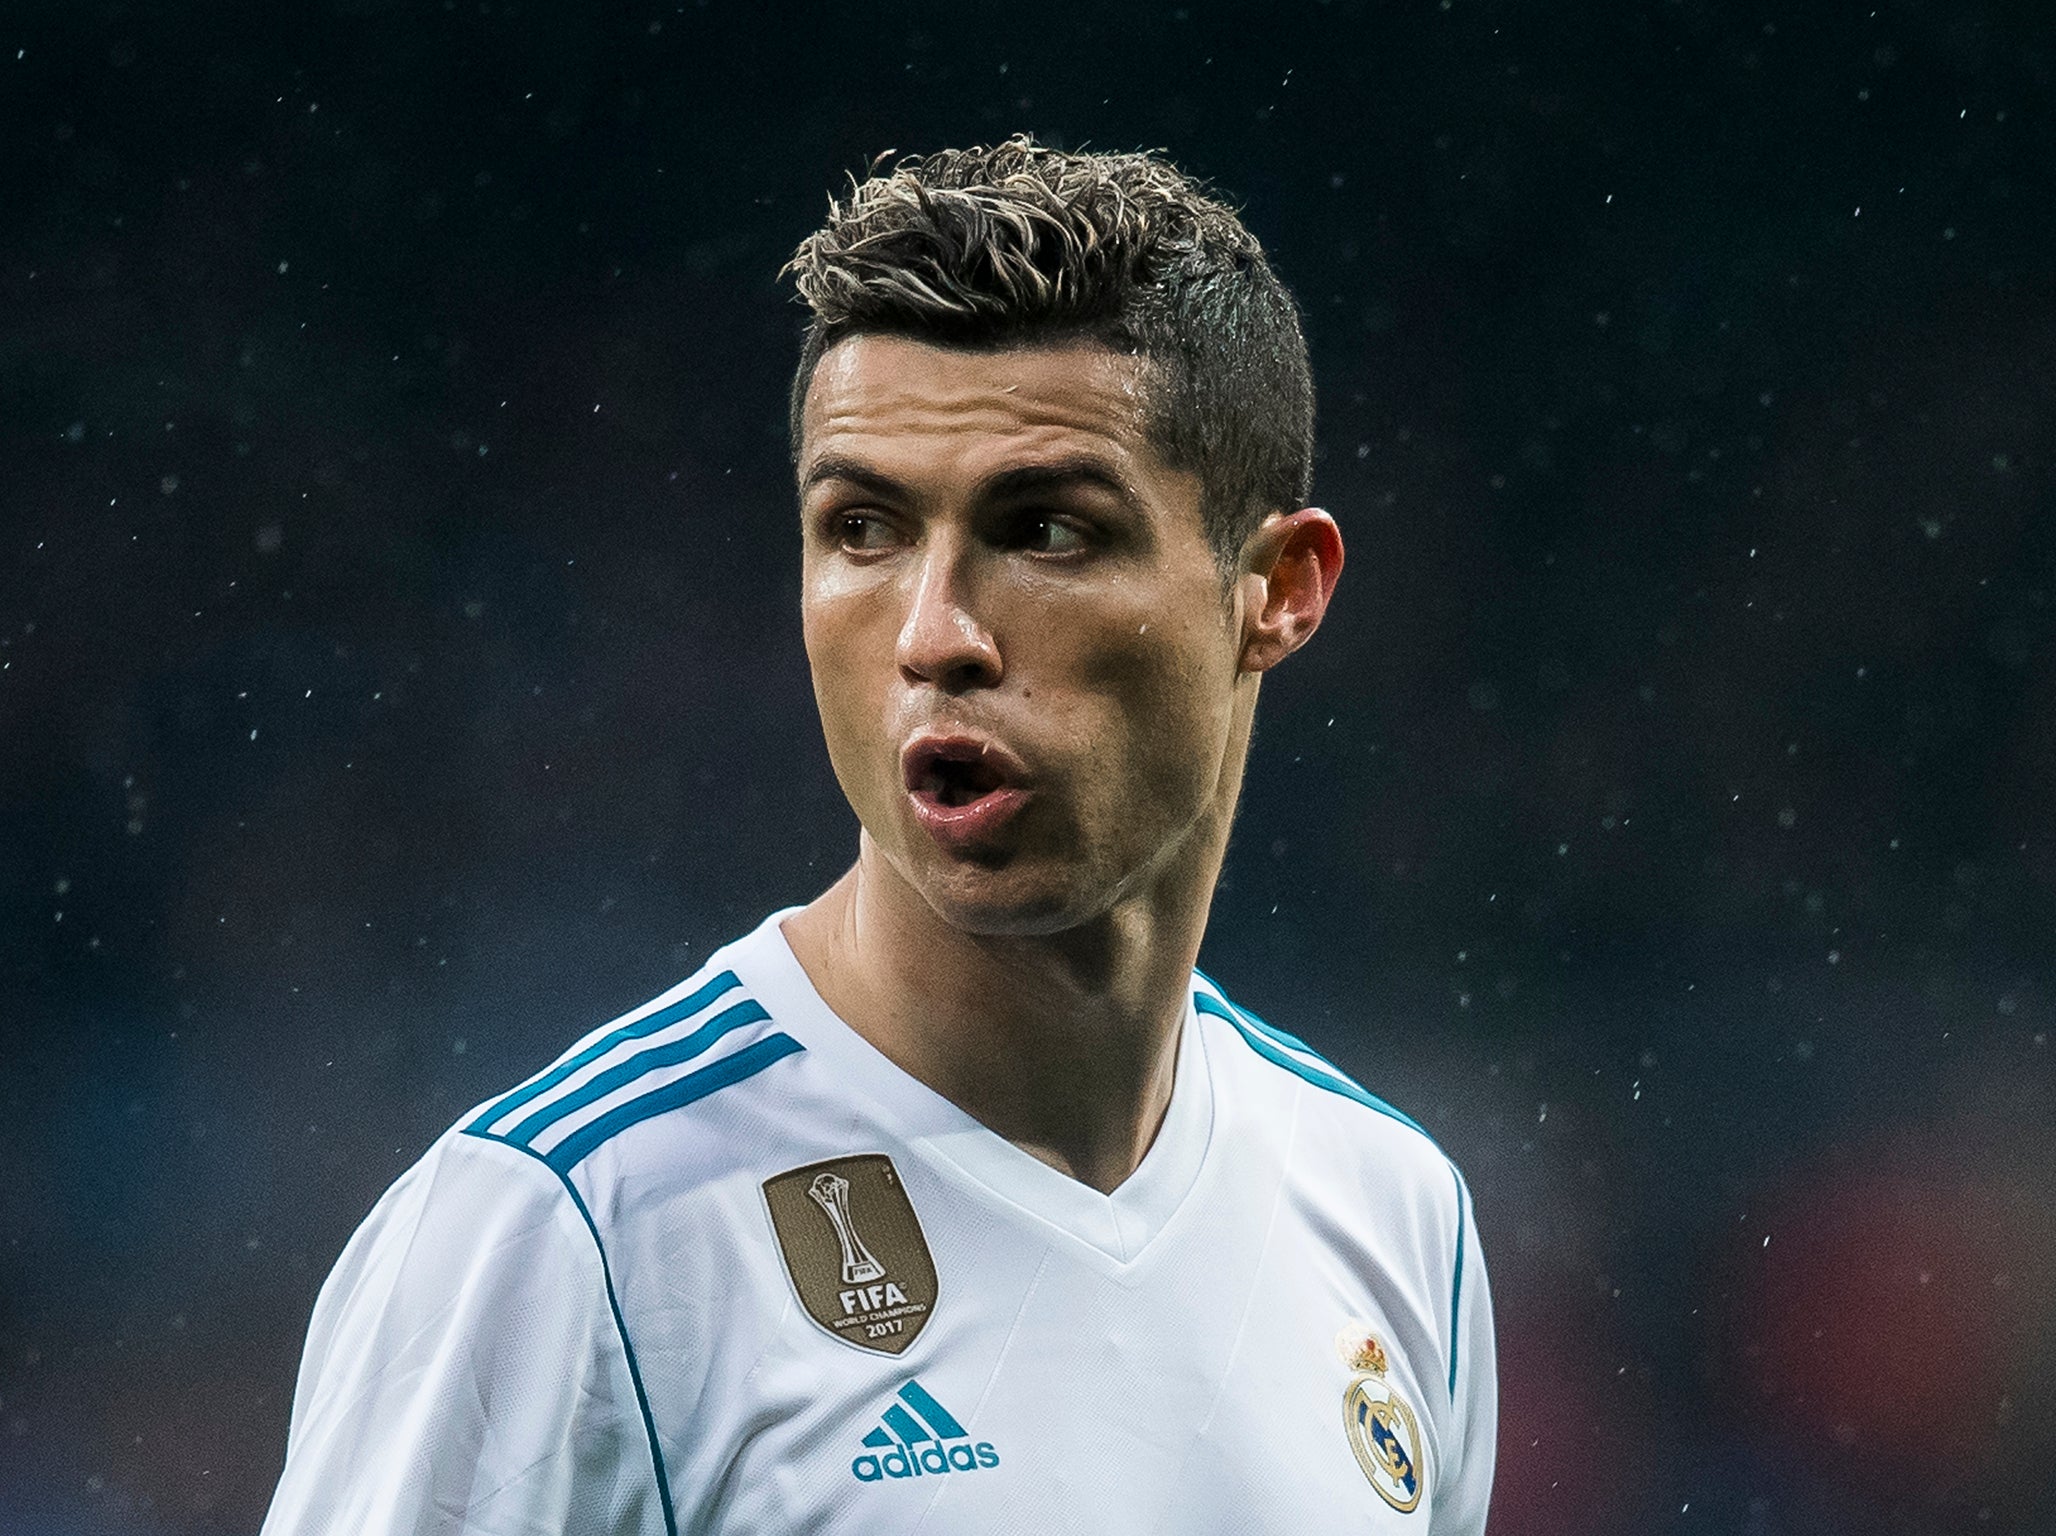 Cristiano Ronaldo will be looking to hit the ground running in the knockout stages of the Champions League